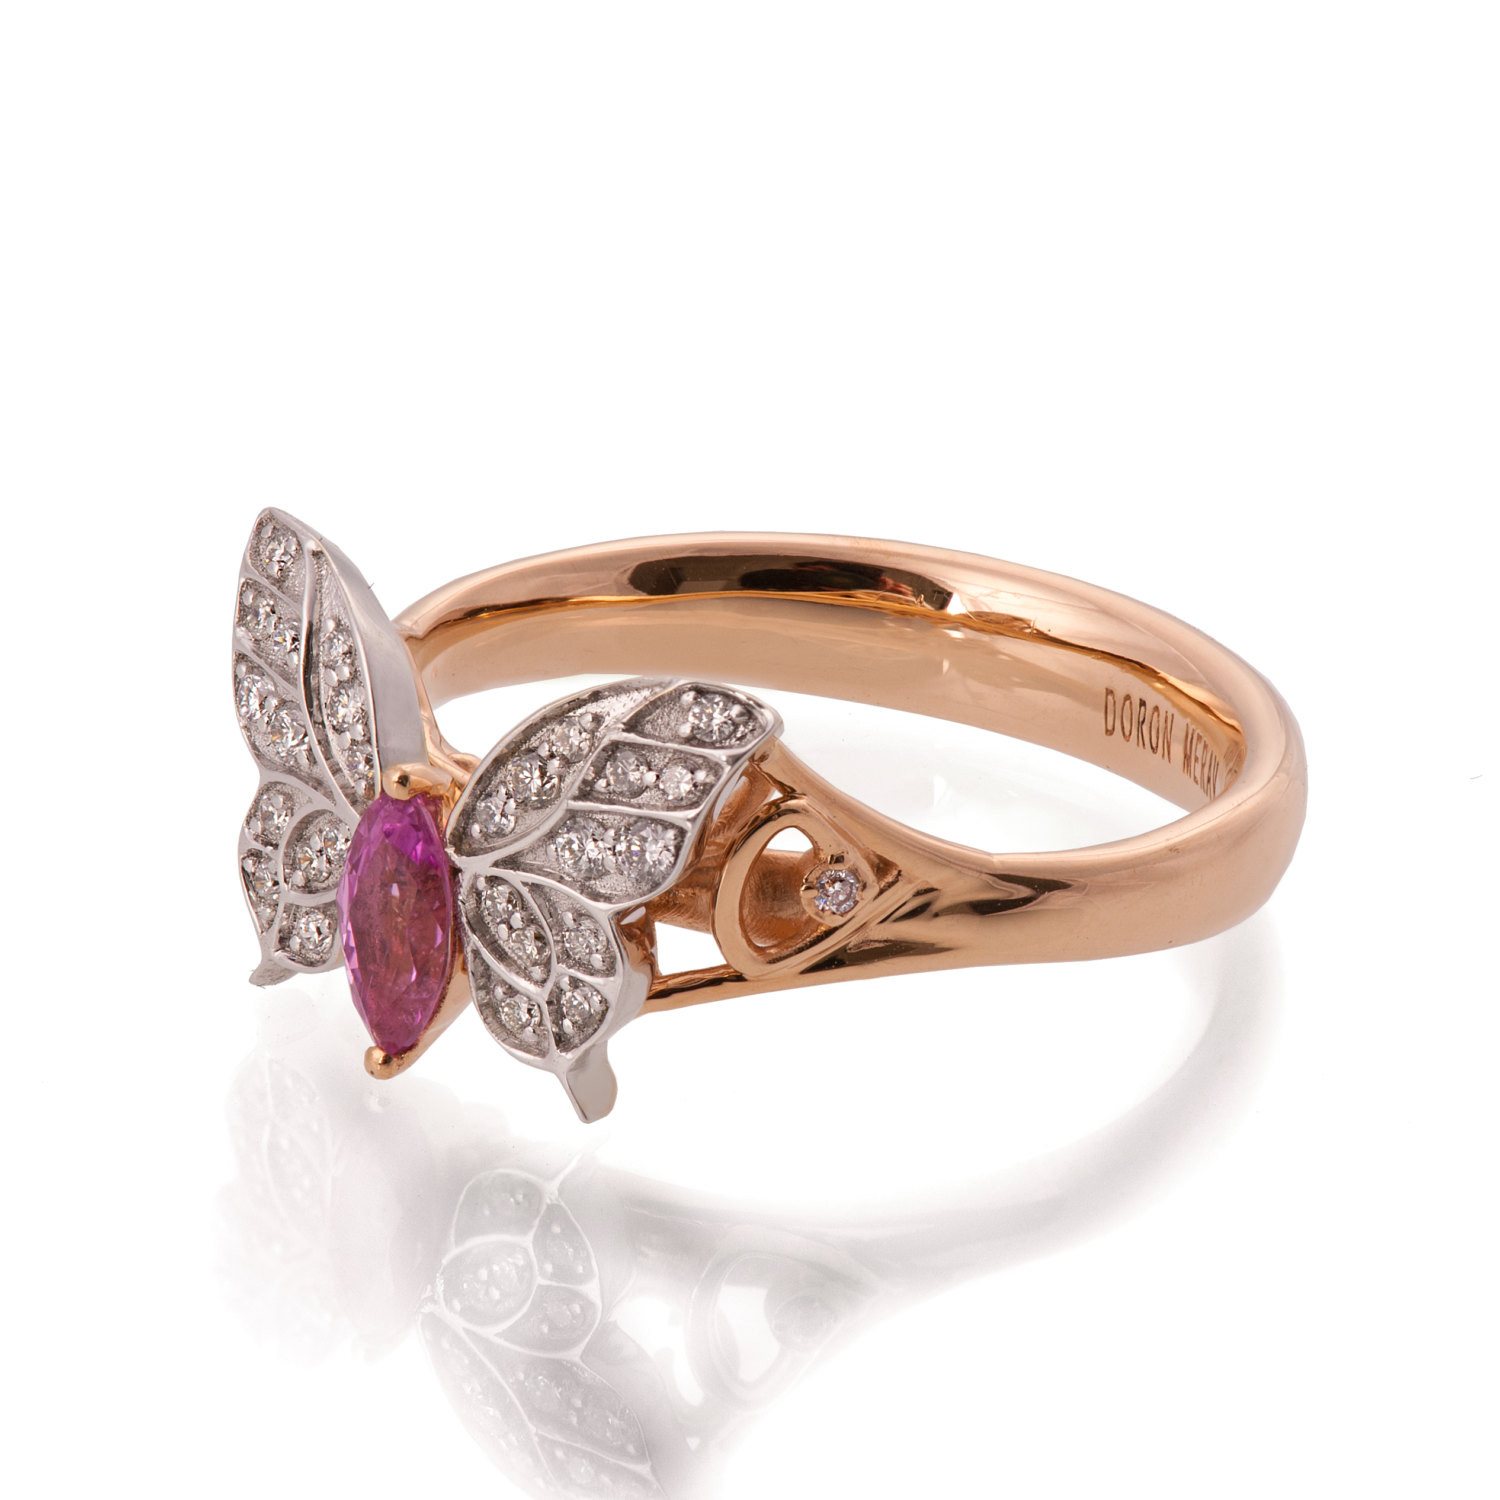 Butterfly Wedding Ring
 Butterfly Engagement Ring 18K Rose Gold and Pink Sapphire